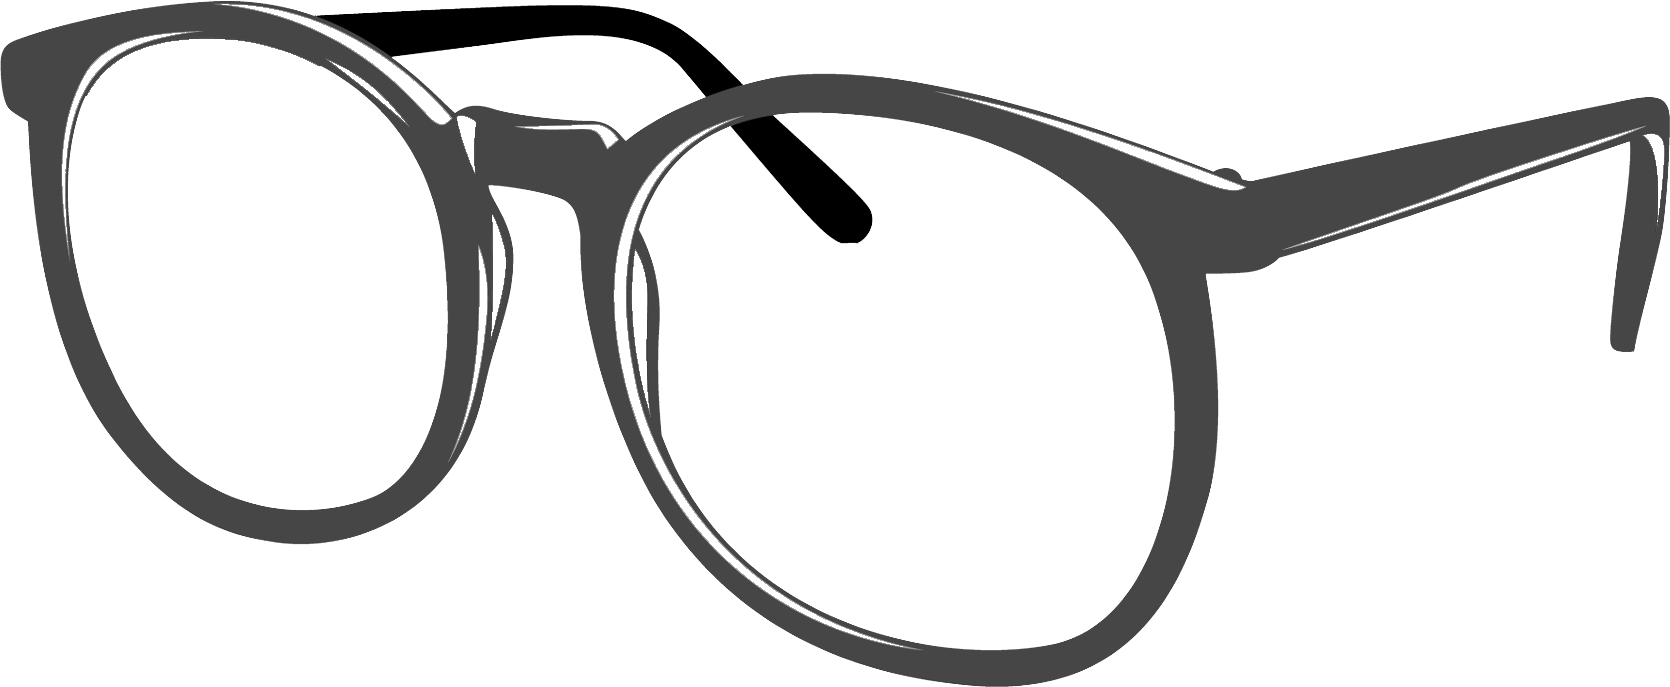 clipart for glasses - photo #28